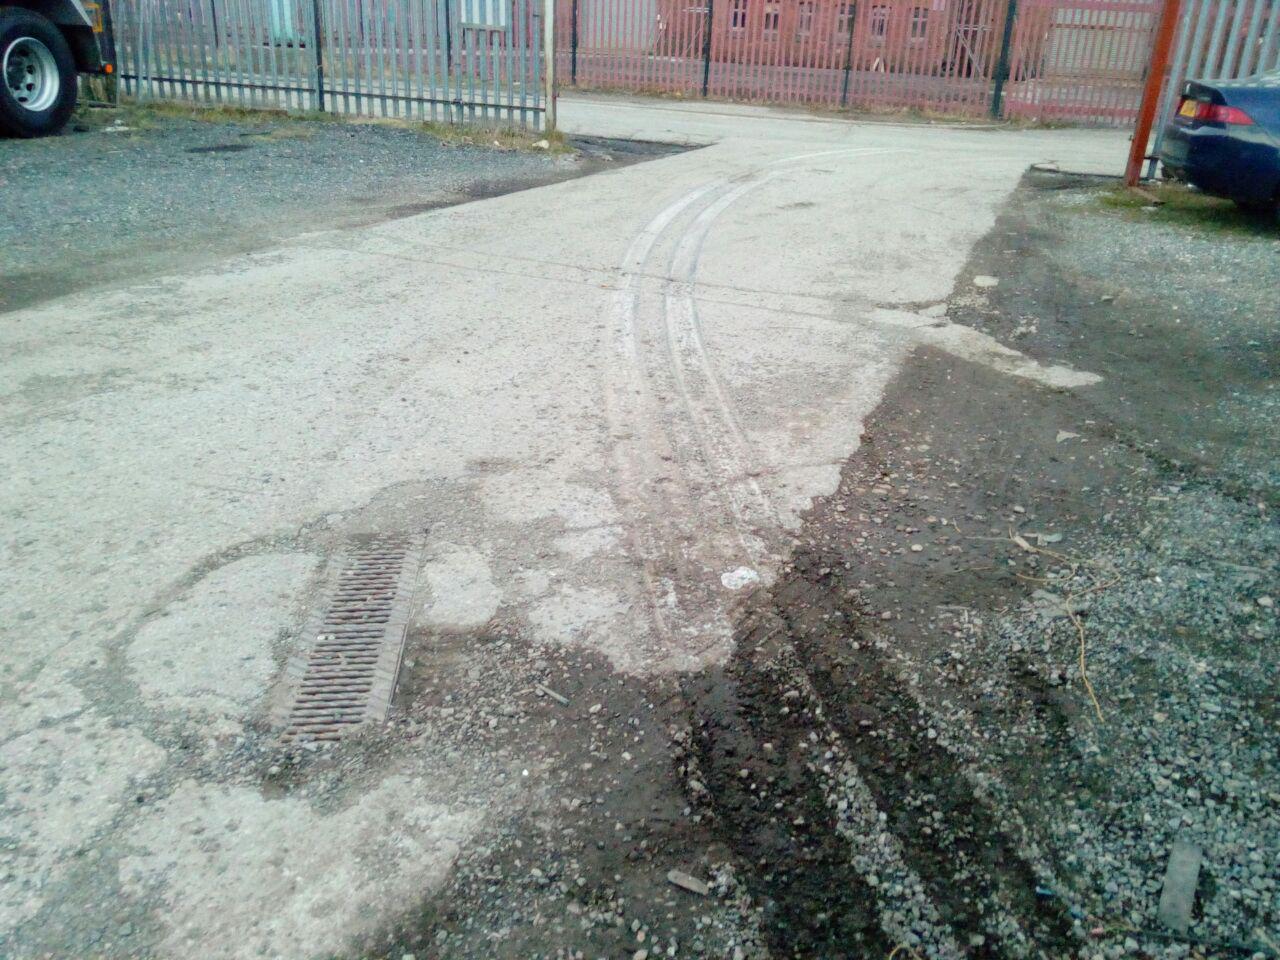 A photograph looking back in the other direction, away from the
truck; showing the deep muddy tyre tracks transition to rubber and
gravel scrape marks on the concrete